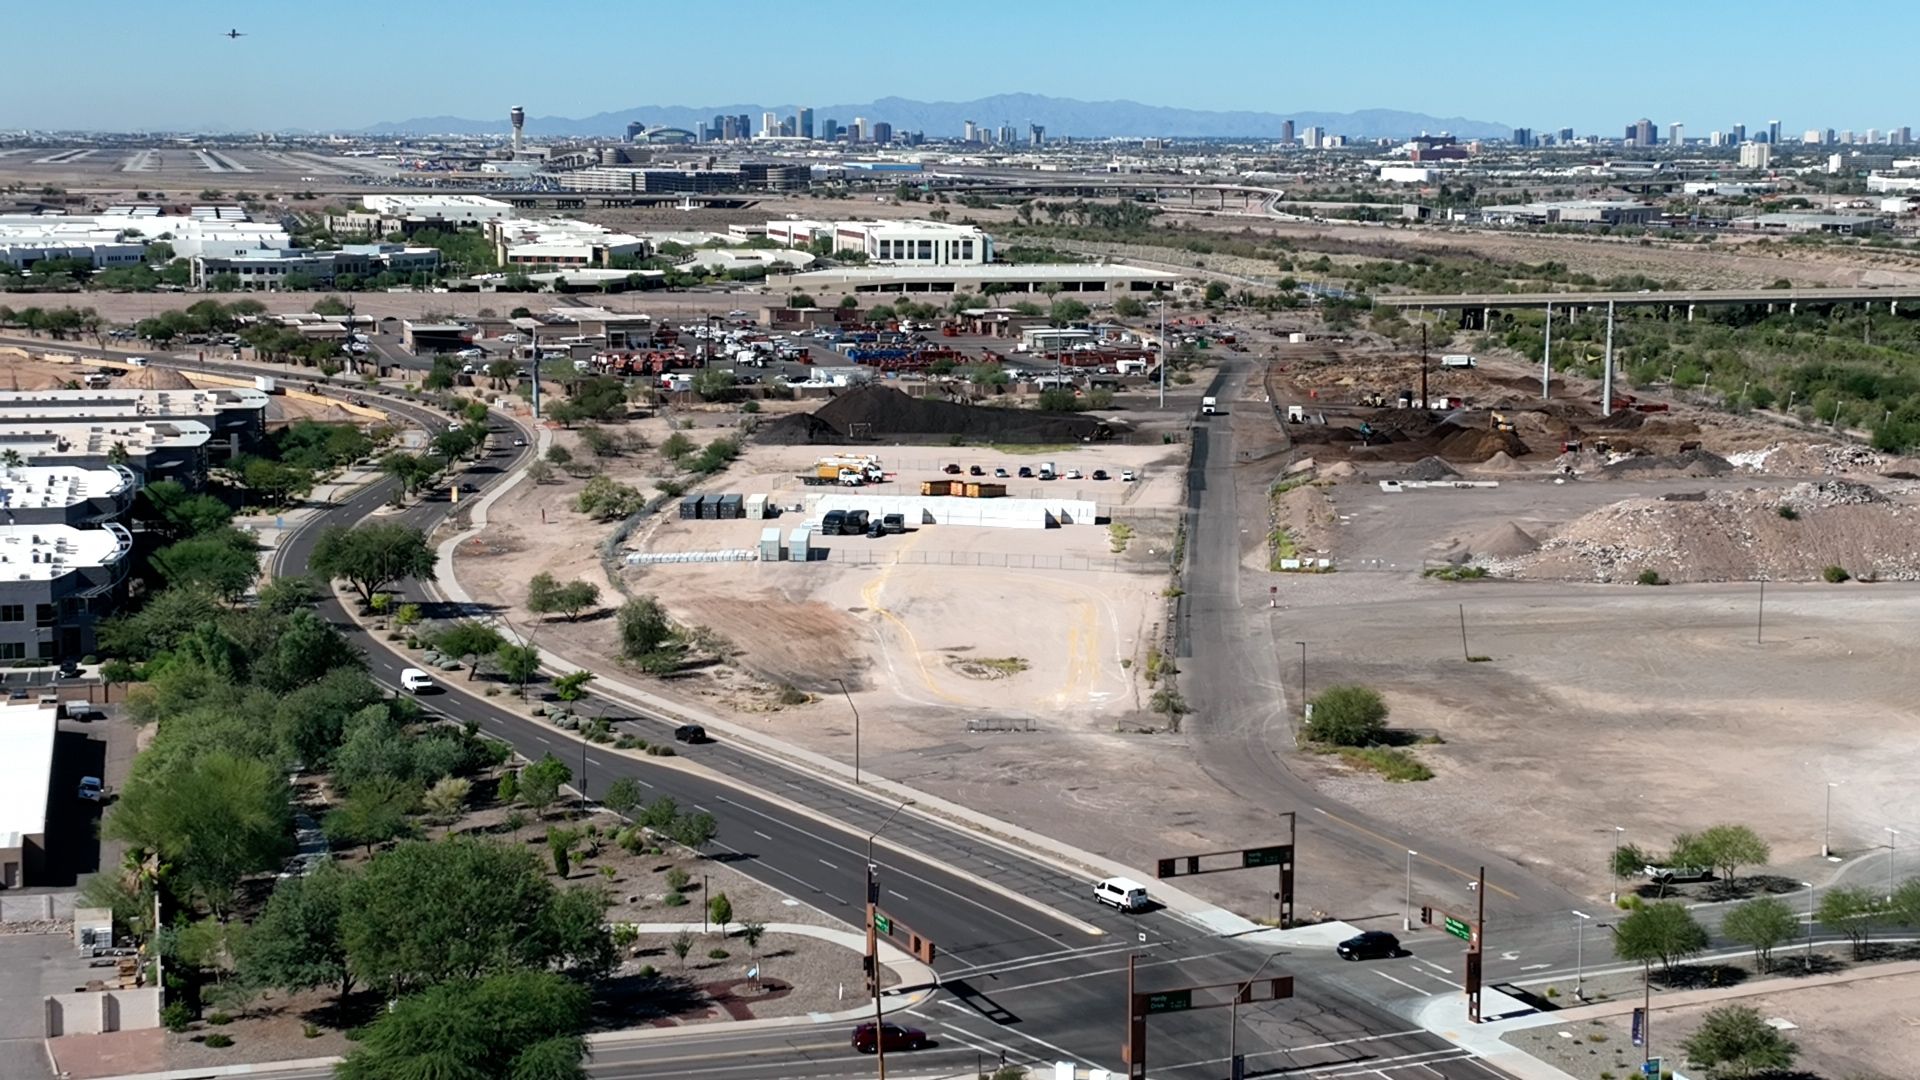 The lot near Tempe Town Lake that was the proposed site of the Tempe Entertainment District that would've featured a new arena for the Arizona Coyotes. Photo courtesy of City of Tempe.